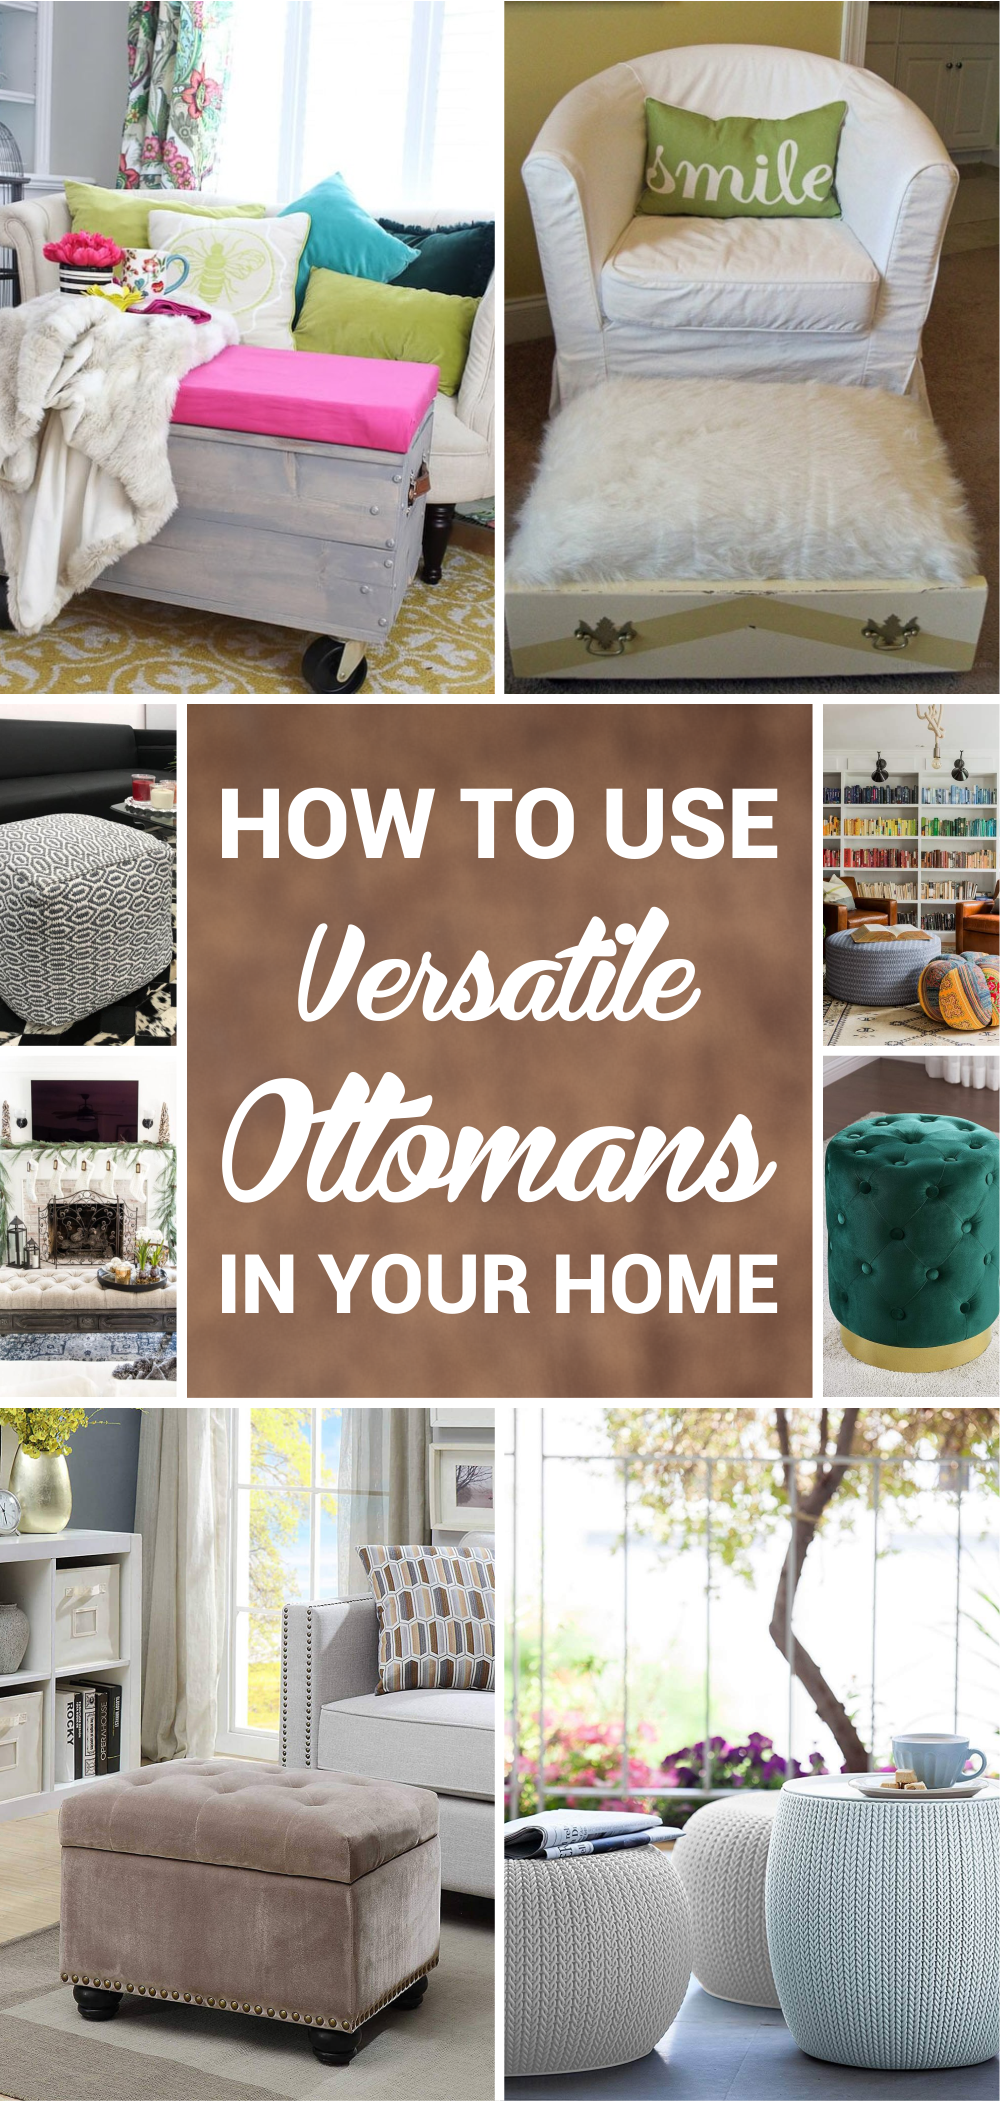 How to use versatile ottomans in your home1